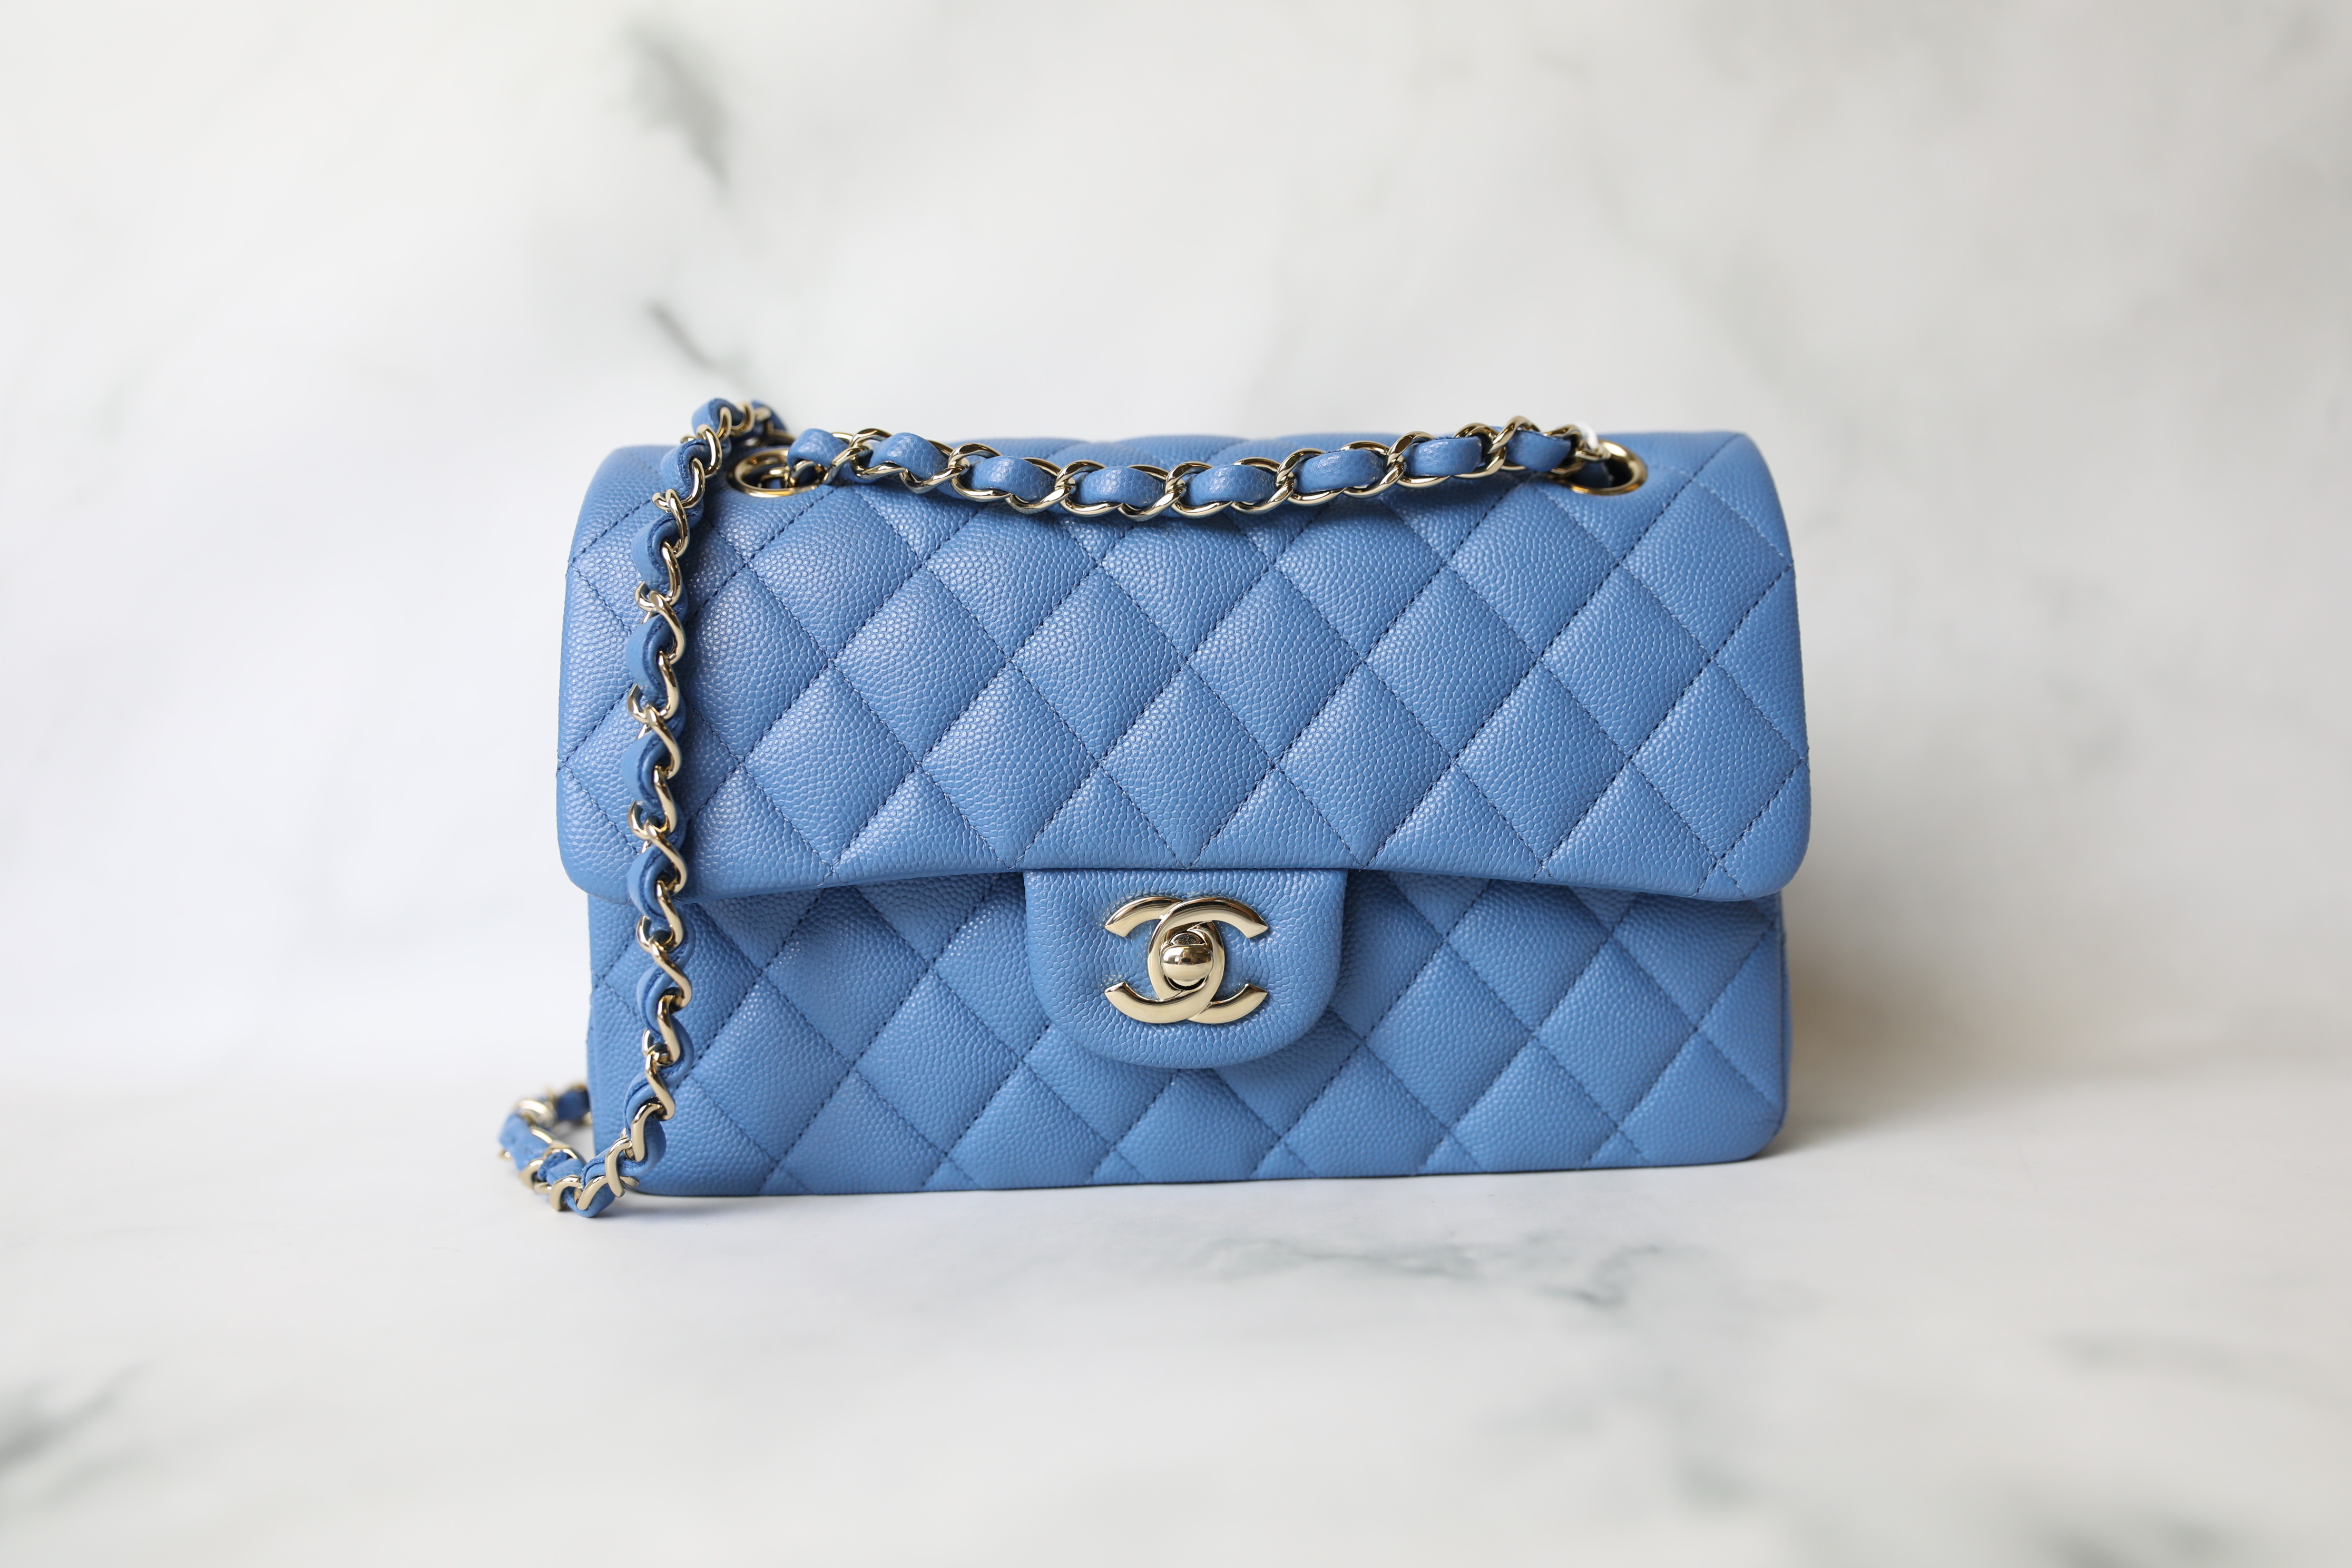 Chanel Classic Small, 21P Blue Caviar with Gold Hardware, New in